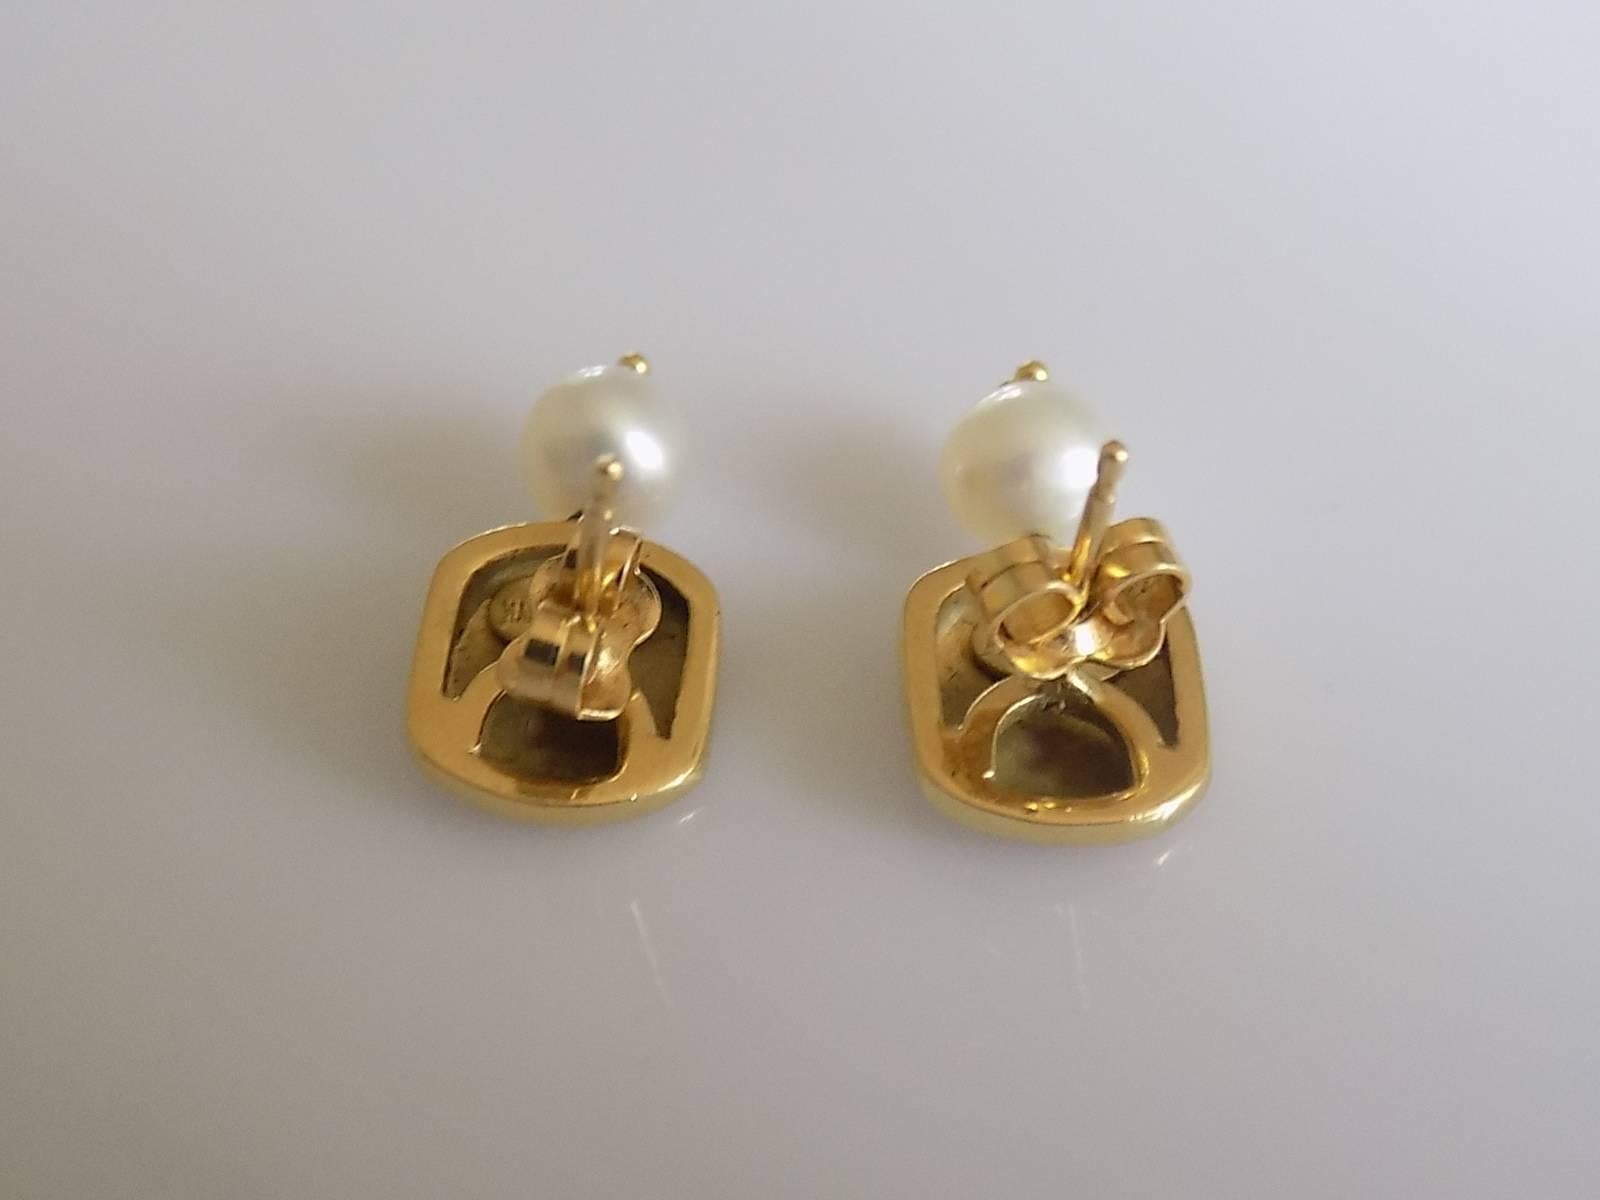 A Lovely and Unique Vintage 18 Carat Gold and Pearl stud earrings for pierced ears. The earrings with an image of Putti/ Angel/ Cherub. Italian origin.
Total height 18mm, width 10mm.
Weight 3.3gr.
Marked Made in Italy, 18Kt for 18 carat Gold.
The